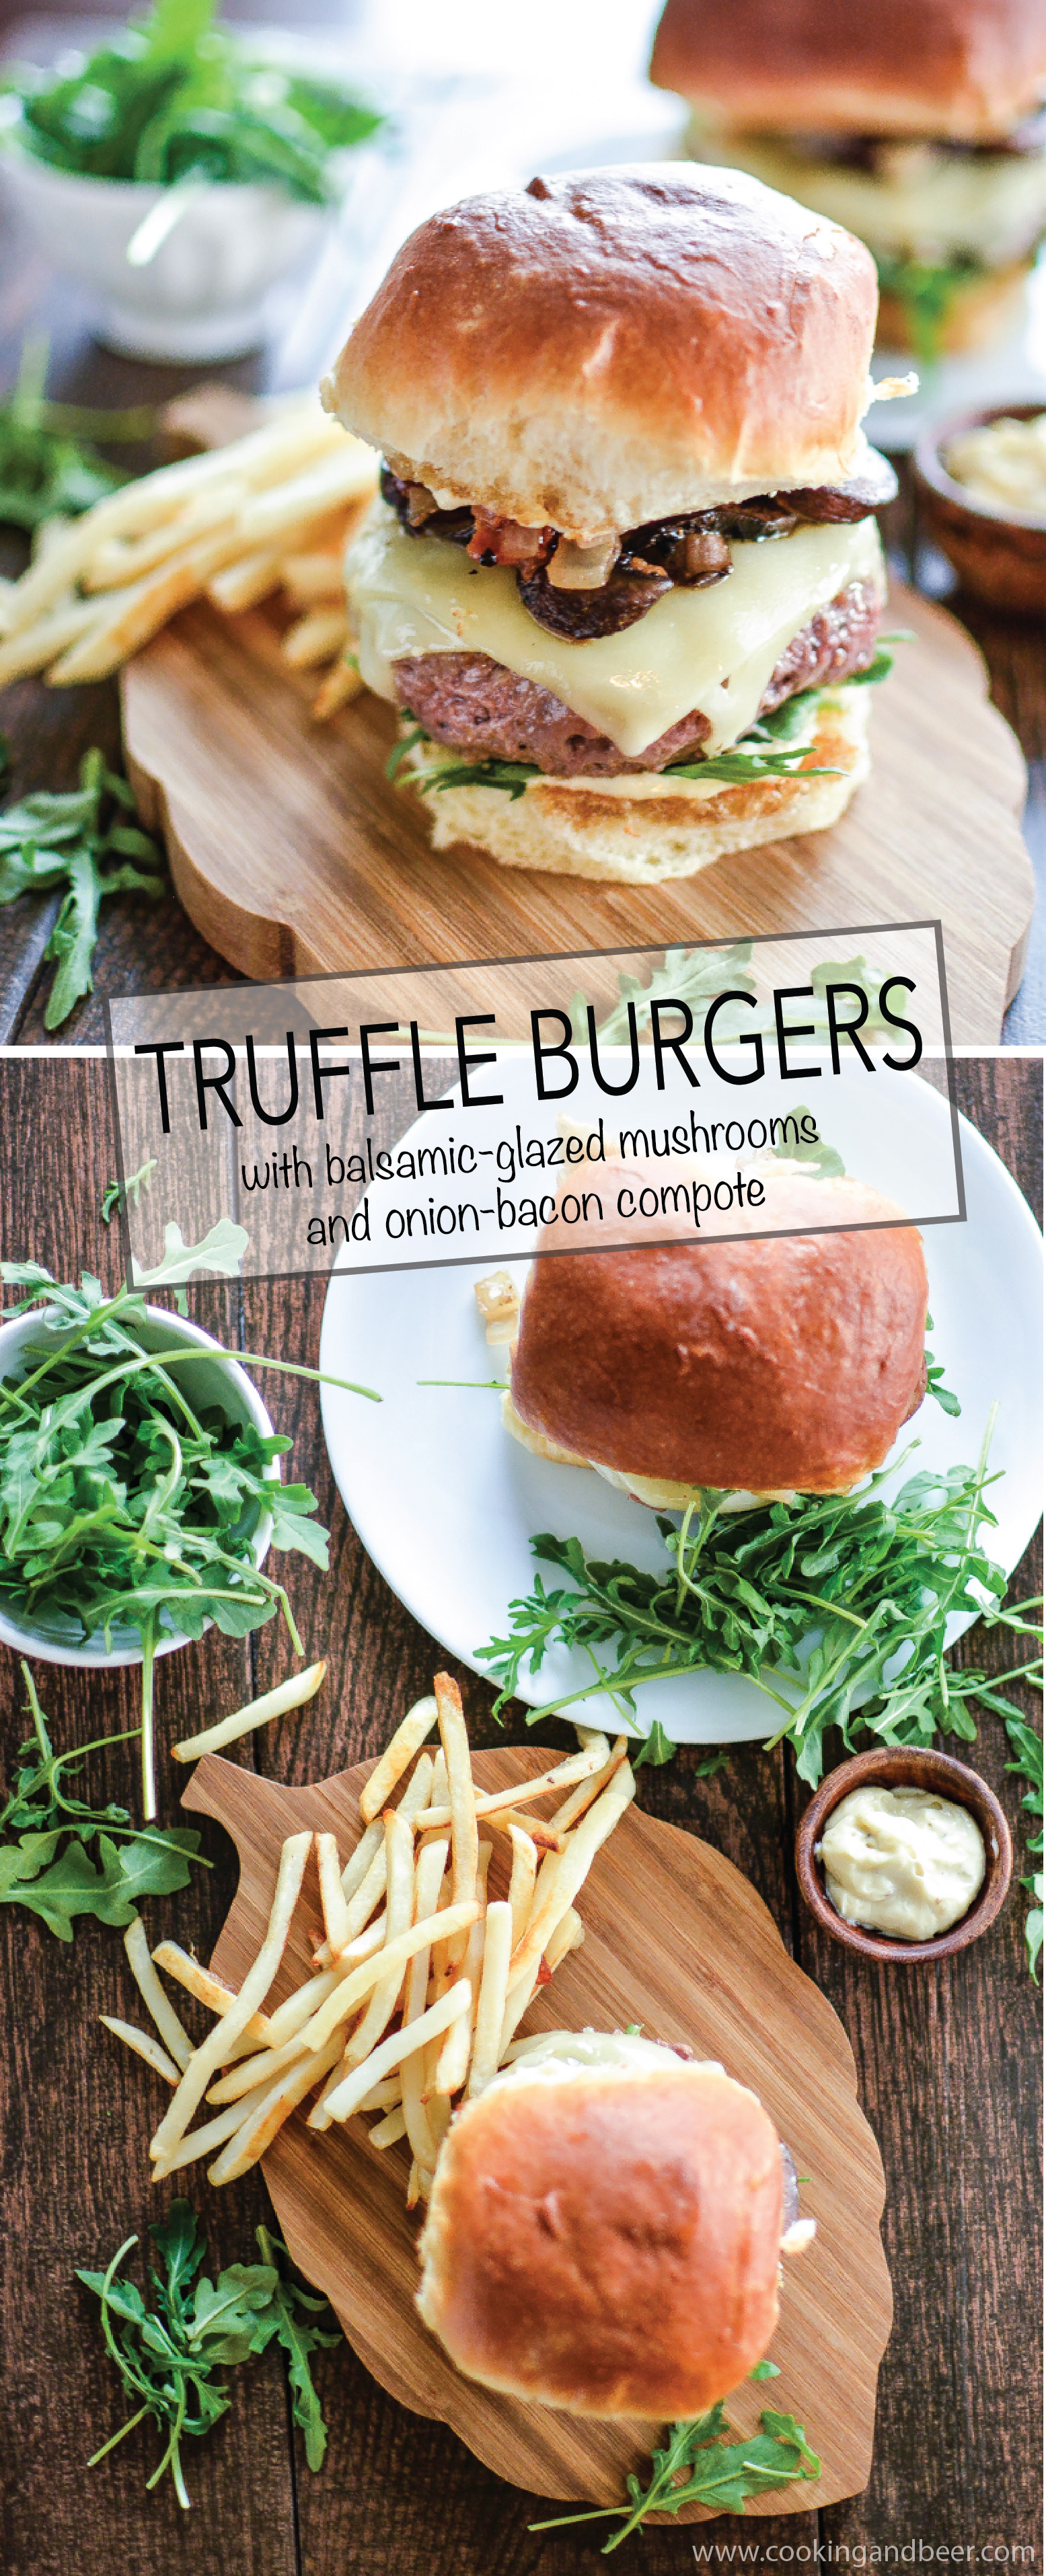 Truffle Burgers with Balsamic-Glazed Mushrooms and Onion-Bacon Compote: a gourmet twist on a classic that is perfect to grill up this summer! | www.cookingandbeer.com